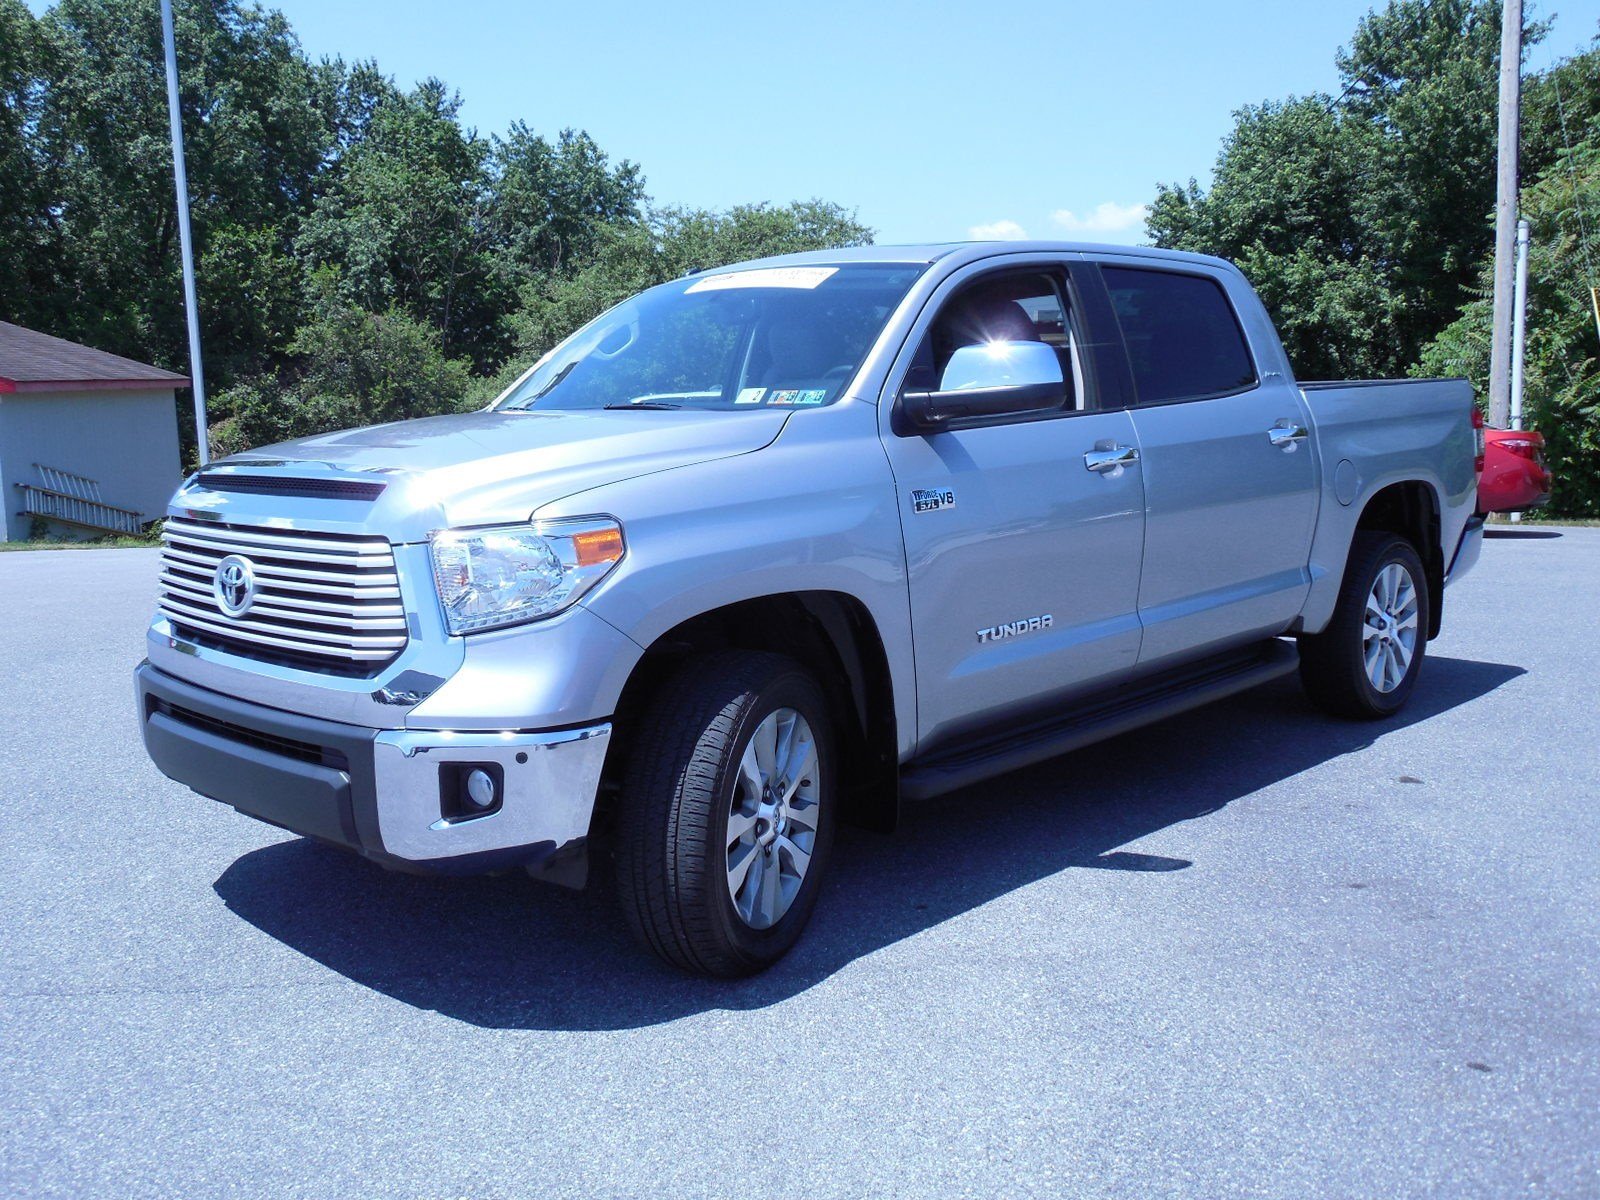 Certified Pre-Owned 2015 Toyota Tundra LTD Crew Cab Pickup in East